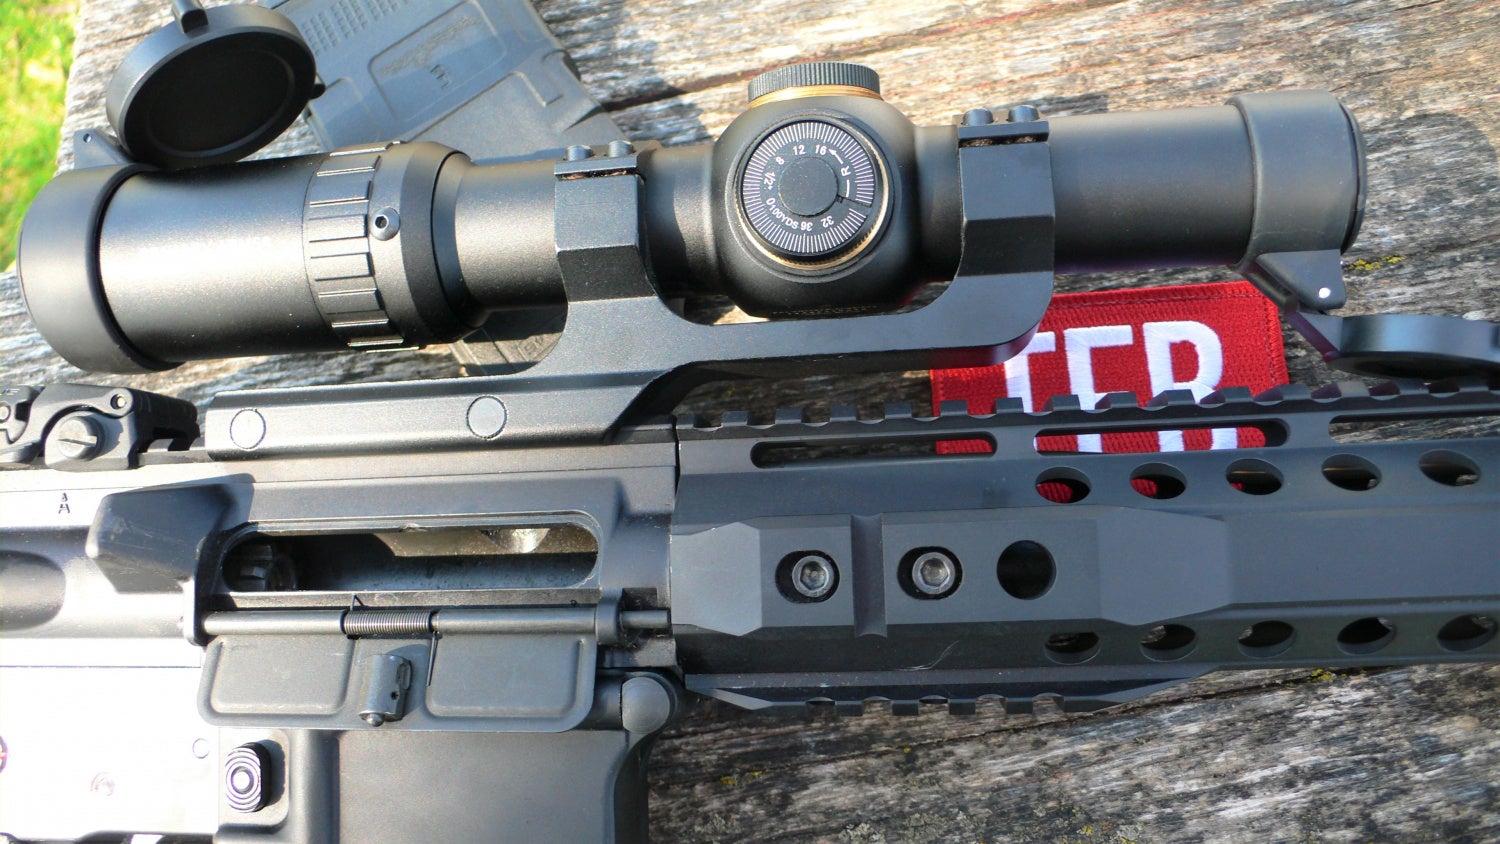 Primary Arms 1-8x scope review